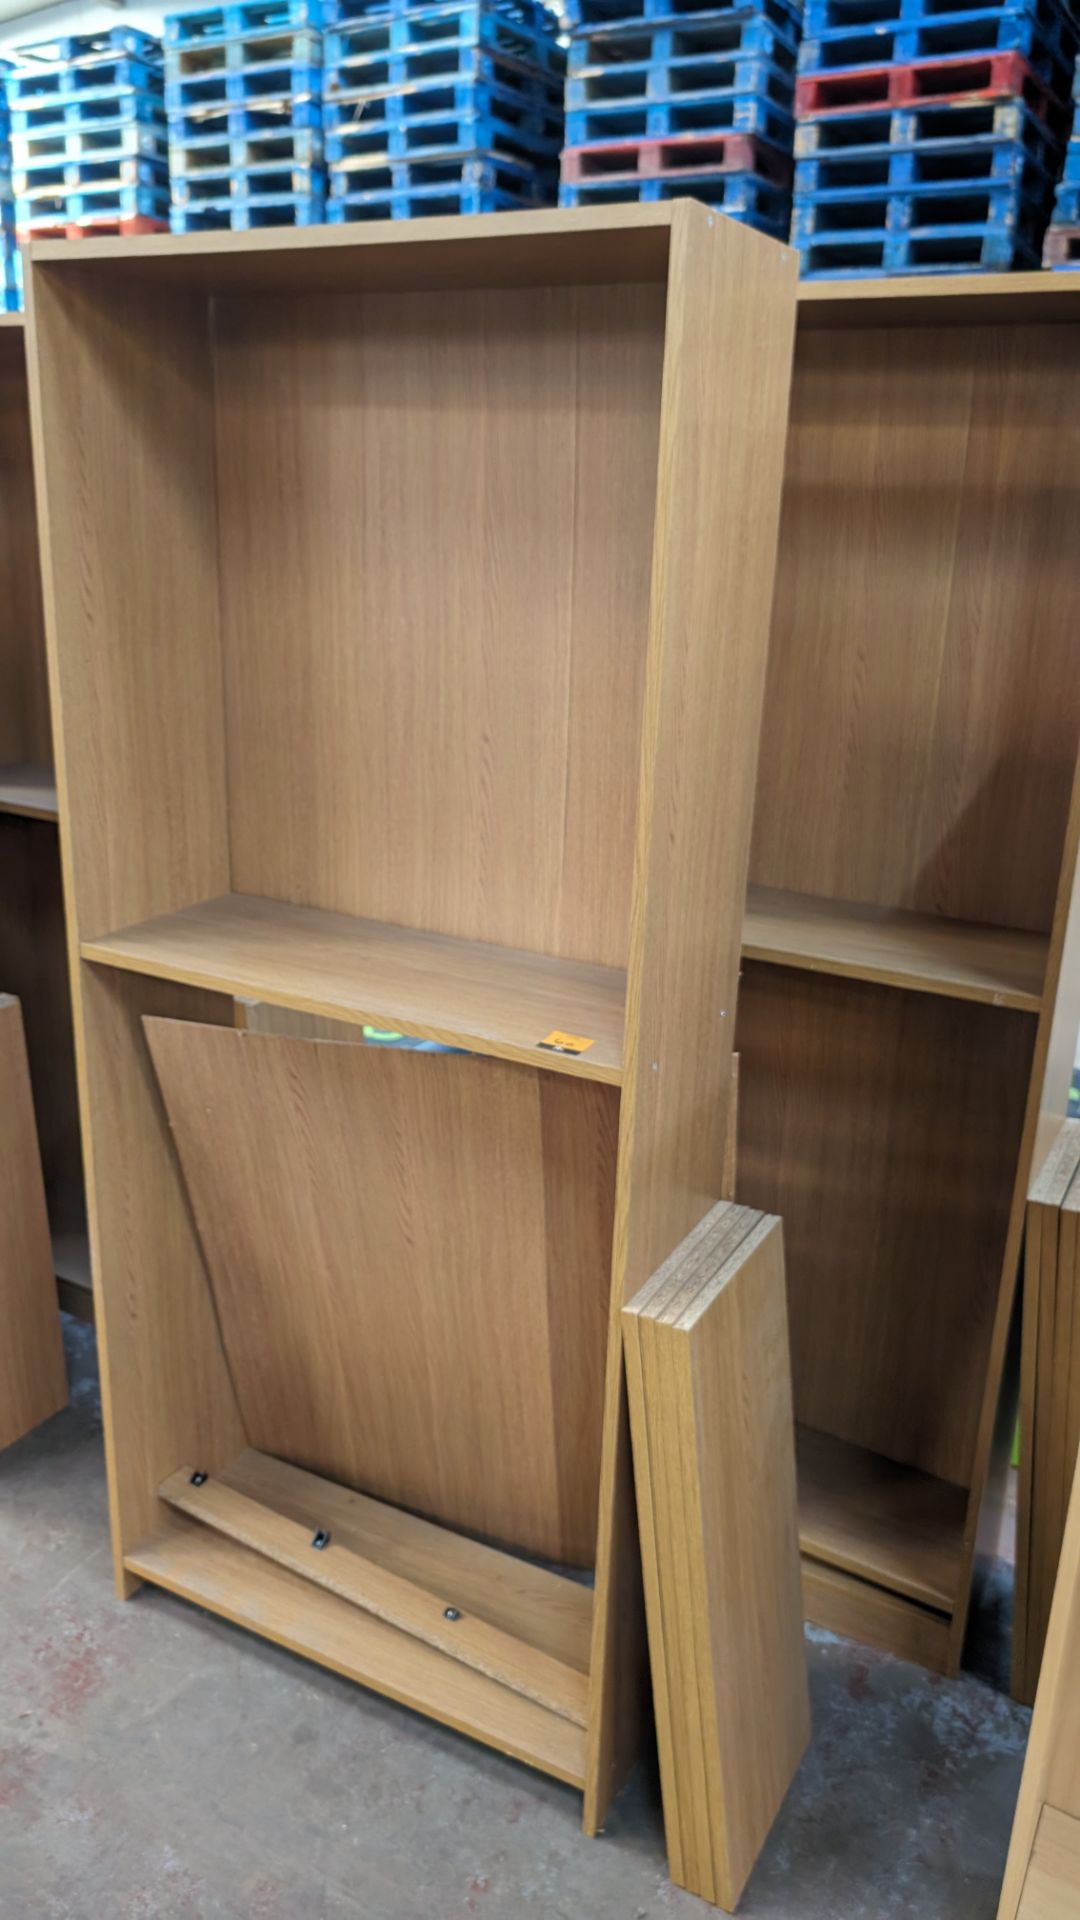 2 off bookcases, each measuring 1800mm x 780mm x 290mm